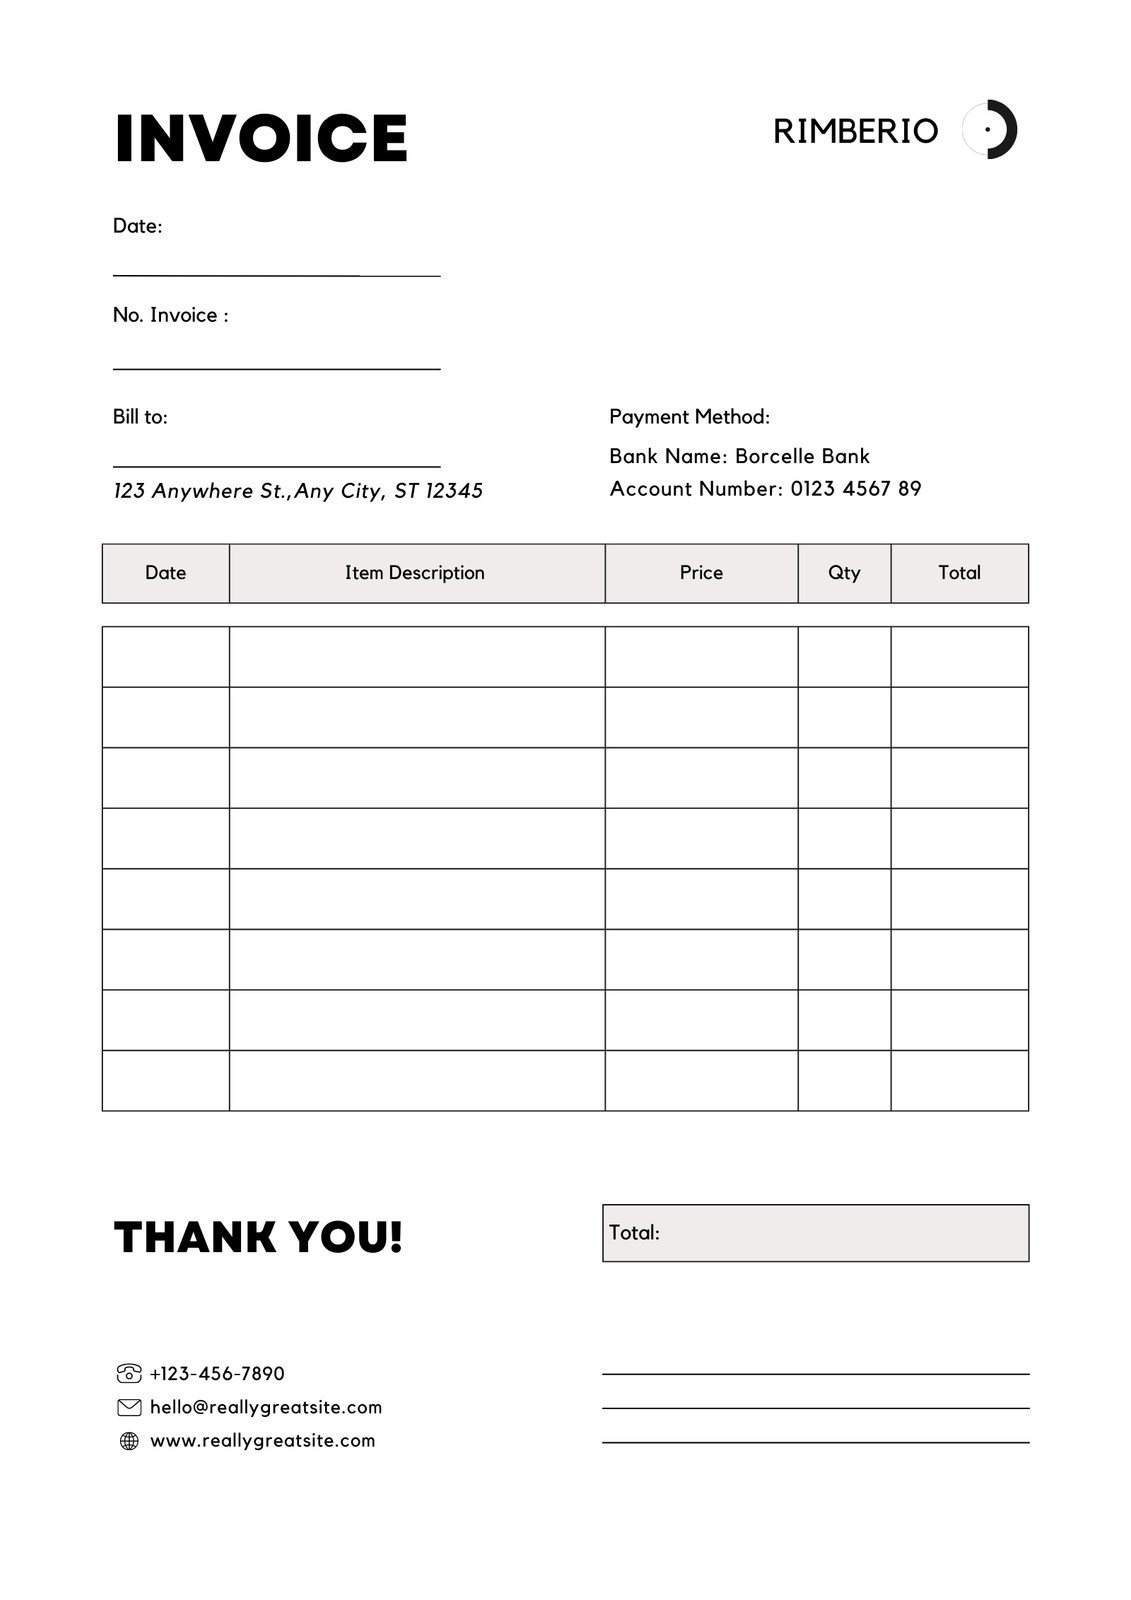 Free, Printable, Professional Invoice Templates To Customize | Canva in Free Printable Invoices